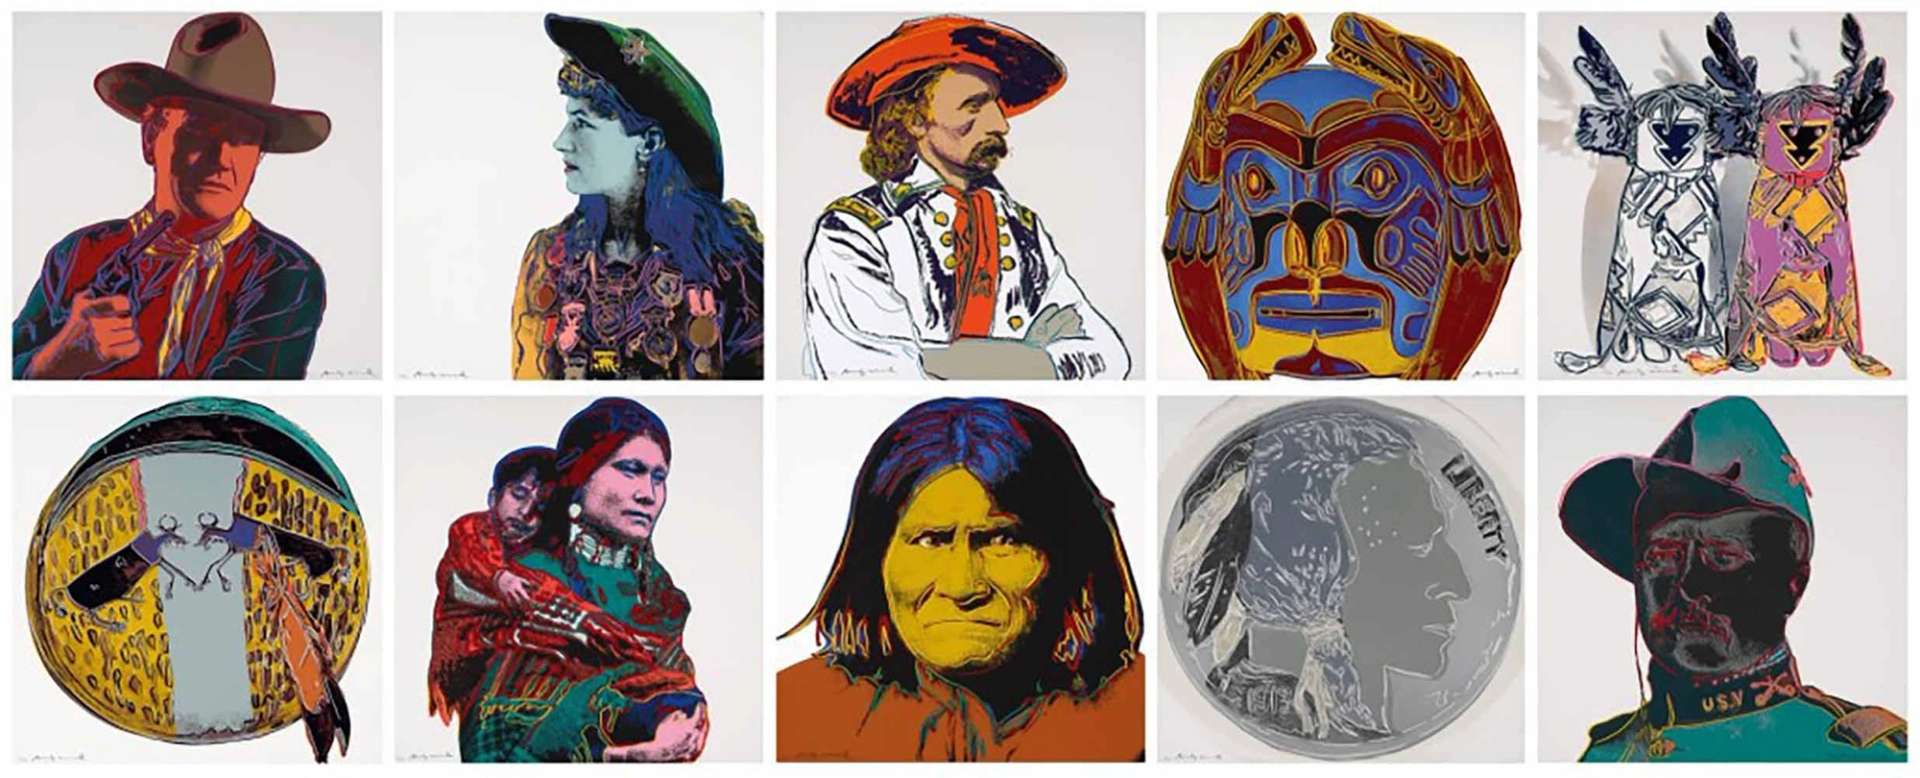 10 Facts About Andy Warhol's Cowboys And Indians